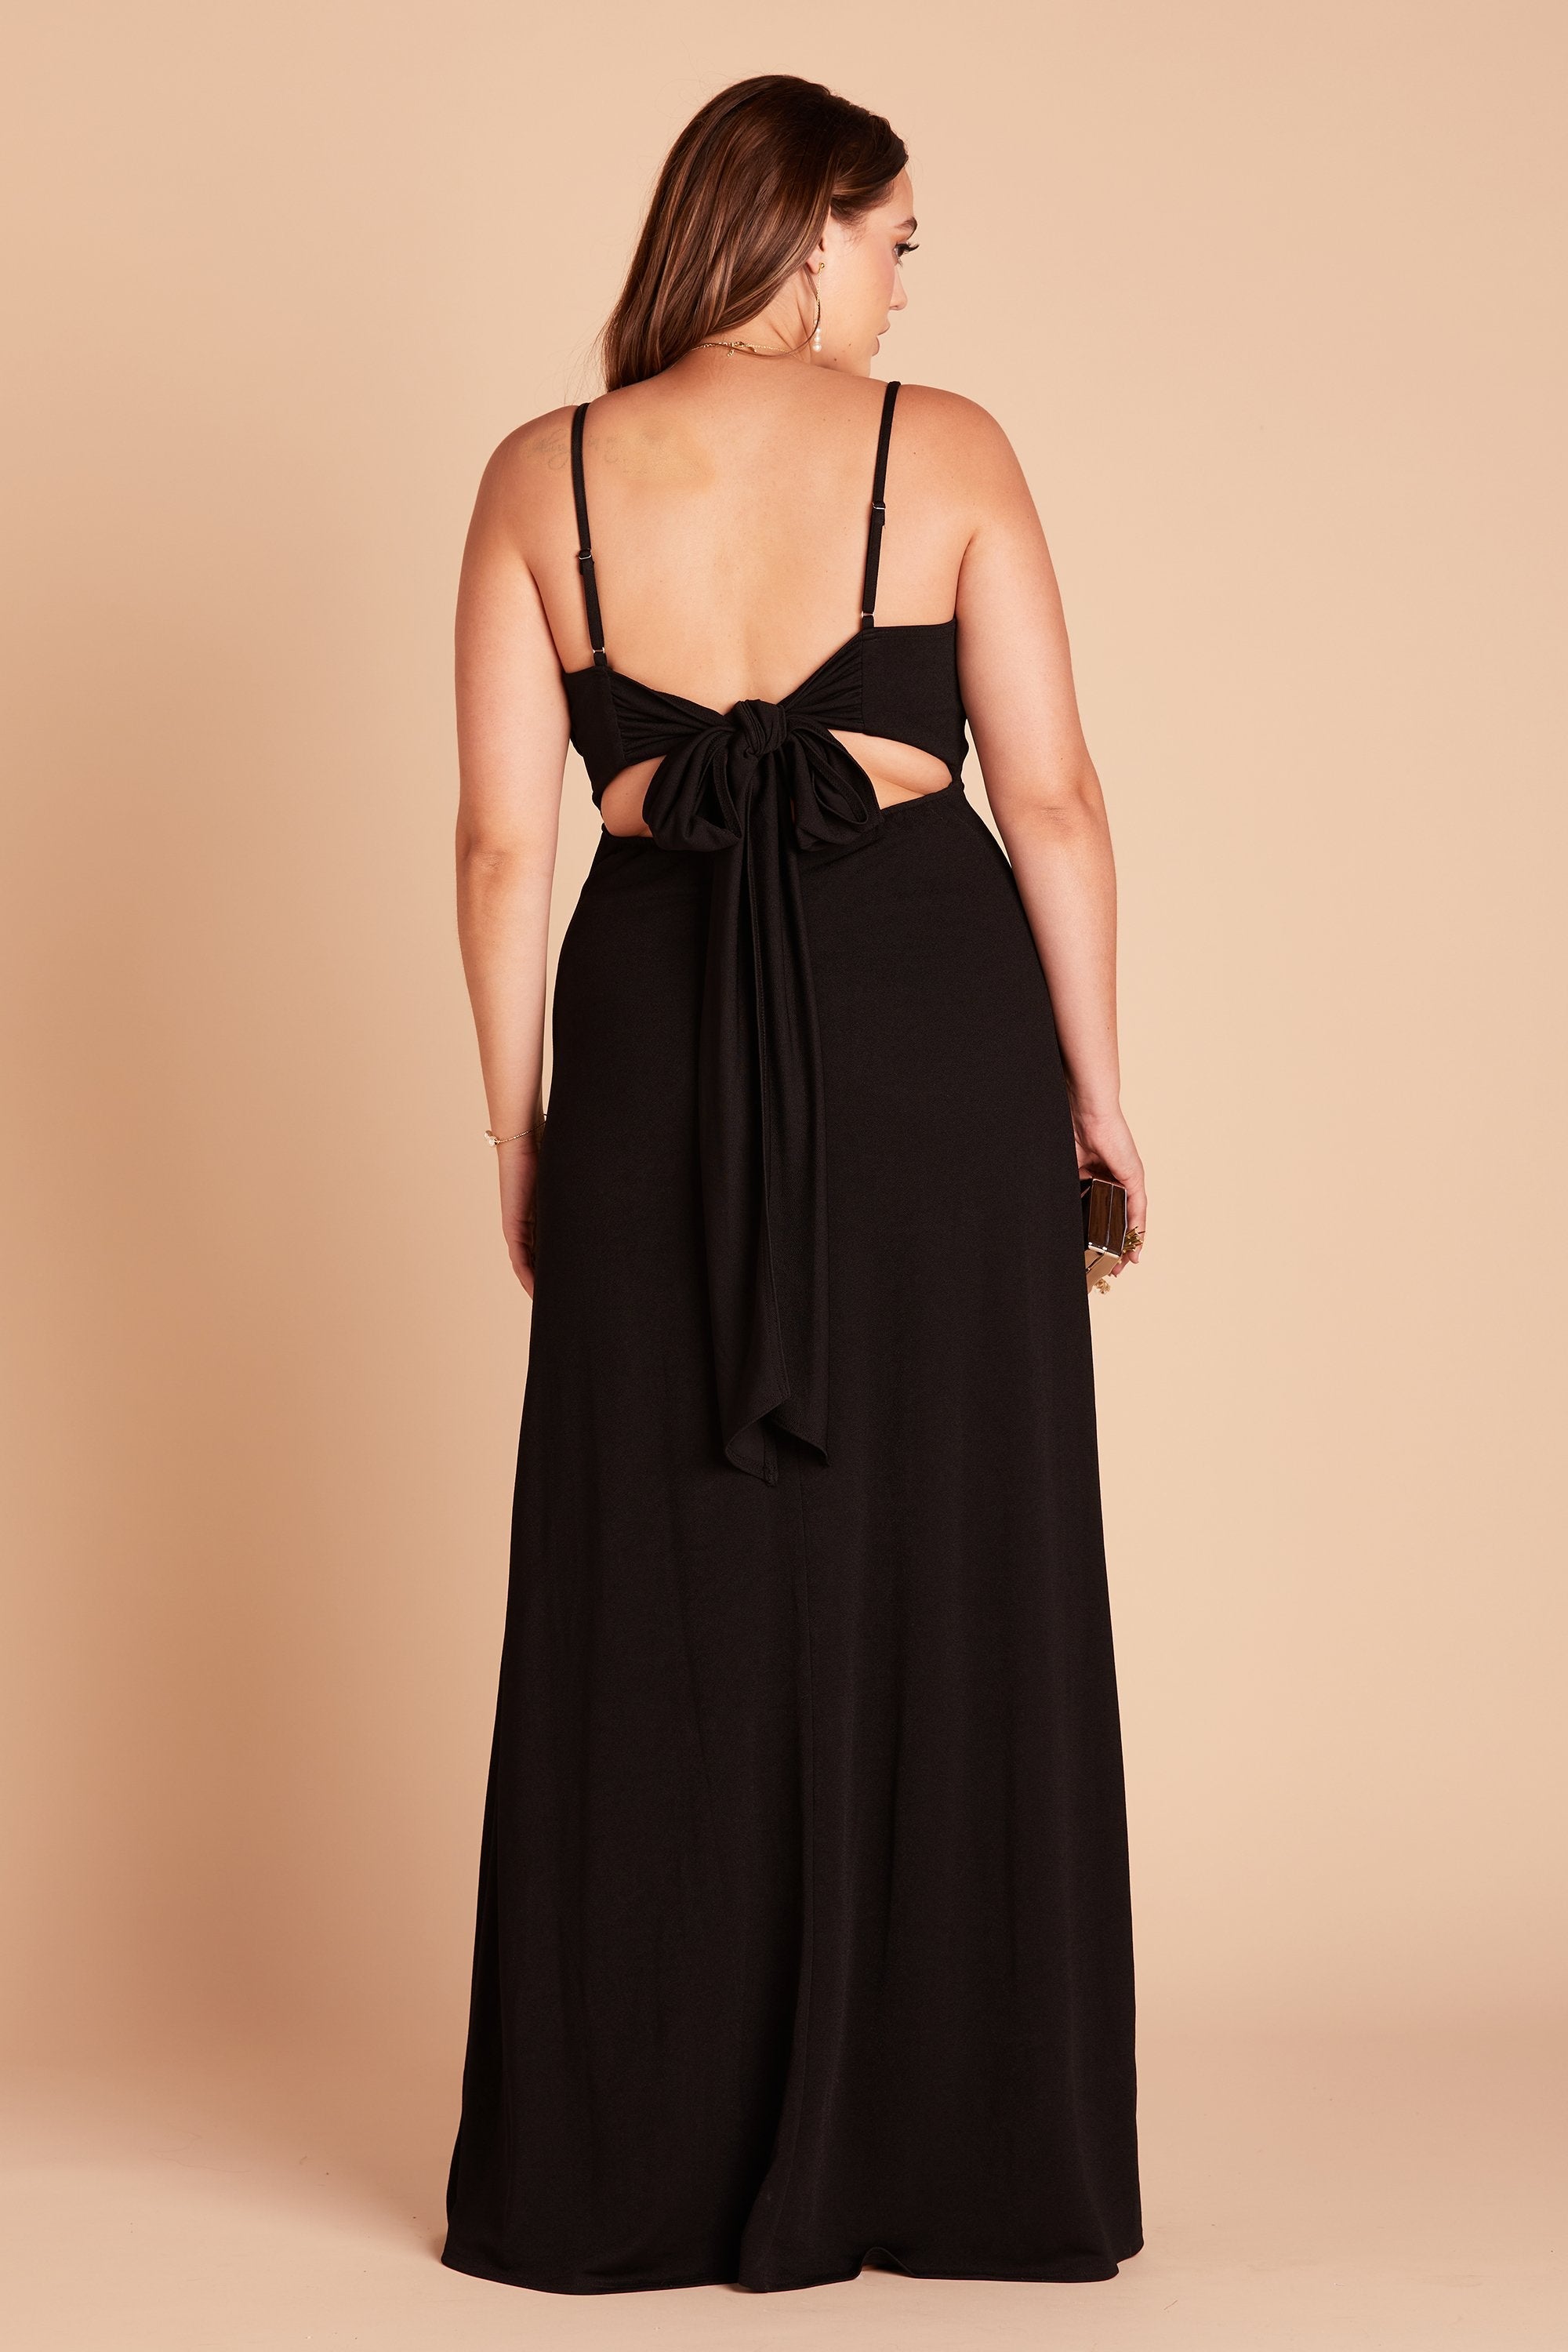 Benny plus size bridesmaid dress in black crepe by Birdy Grey, back view